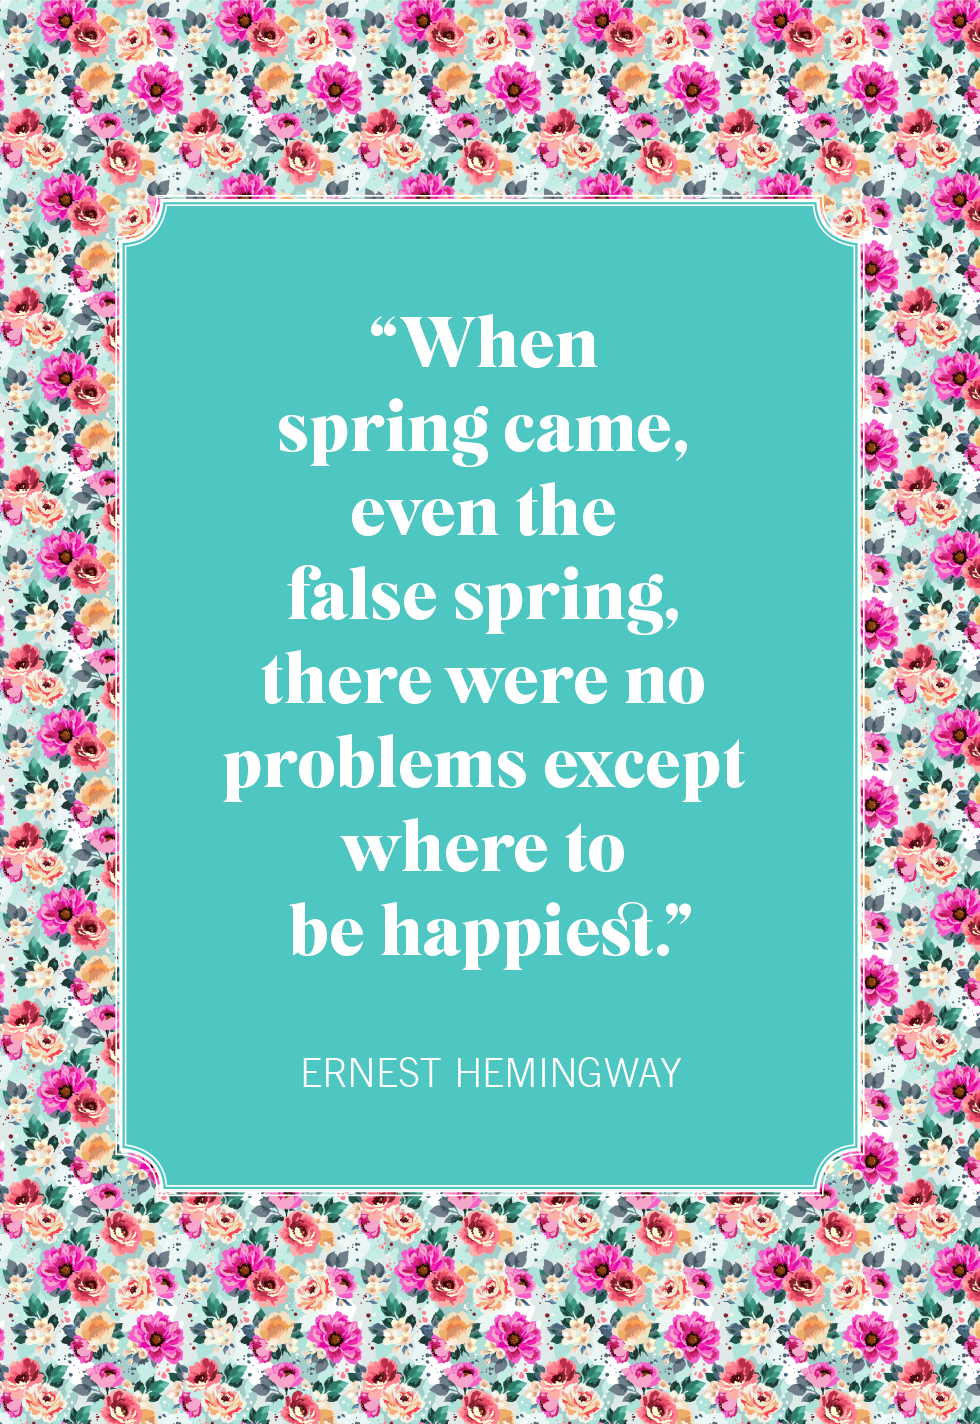 50 Best Spring Quotes - Happy and Poetic Quotes About Spring